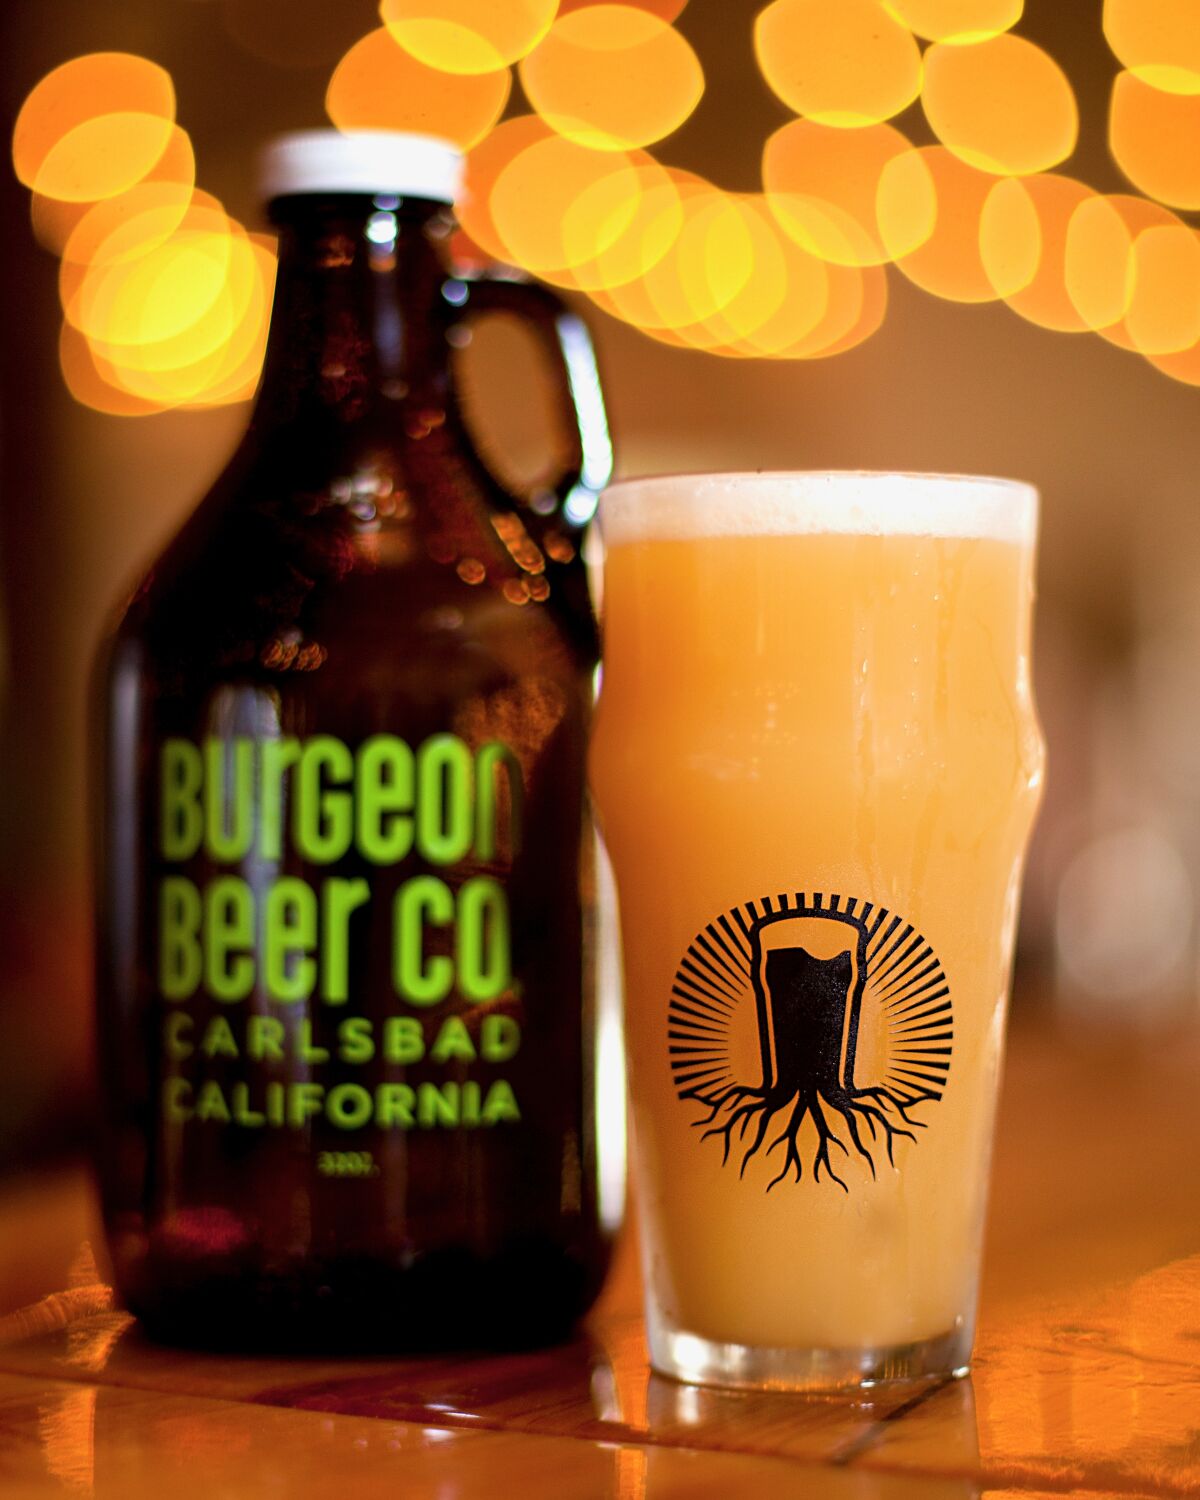 Burgeon Beer's logo pays tribute to the founders' Carlsbad roots.